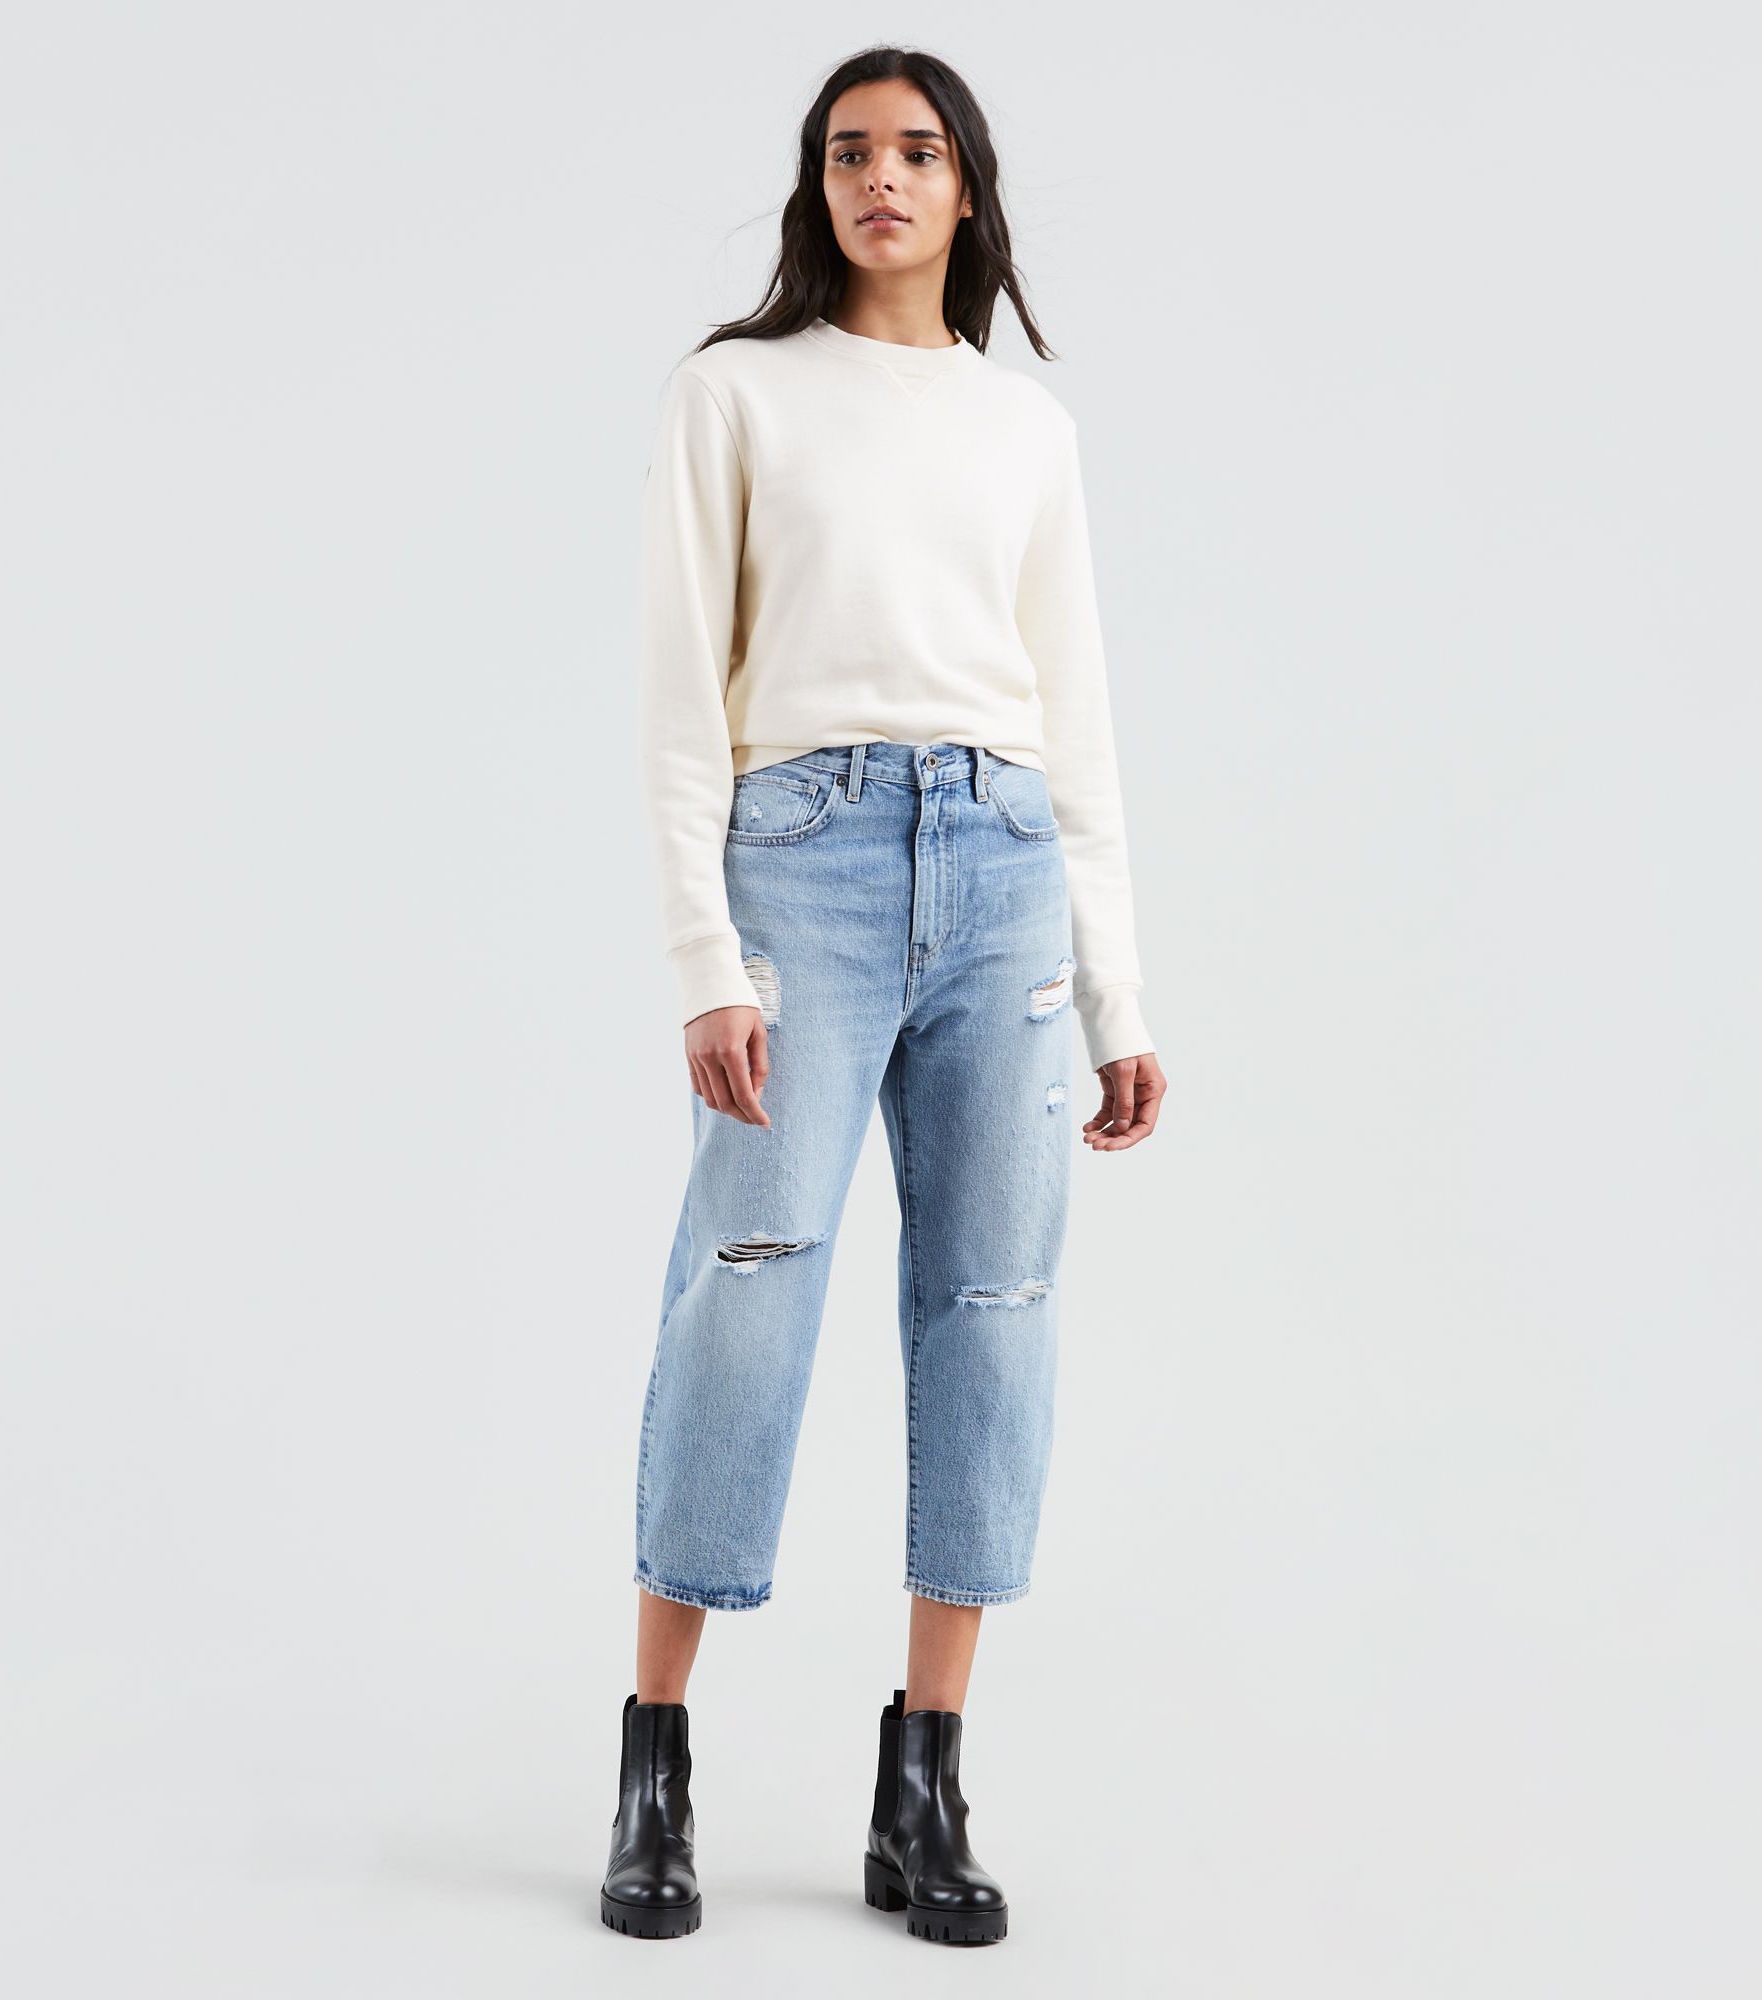 The 8 Best Levi's Jeans For Summer - THE JEANS BLOG